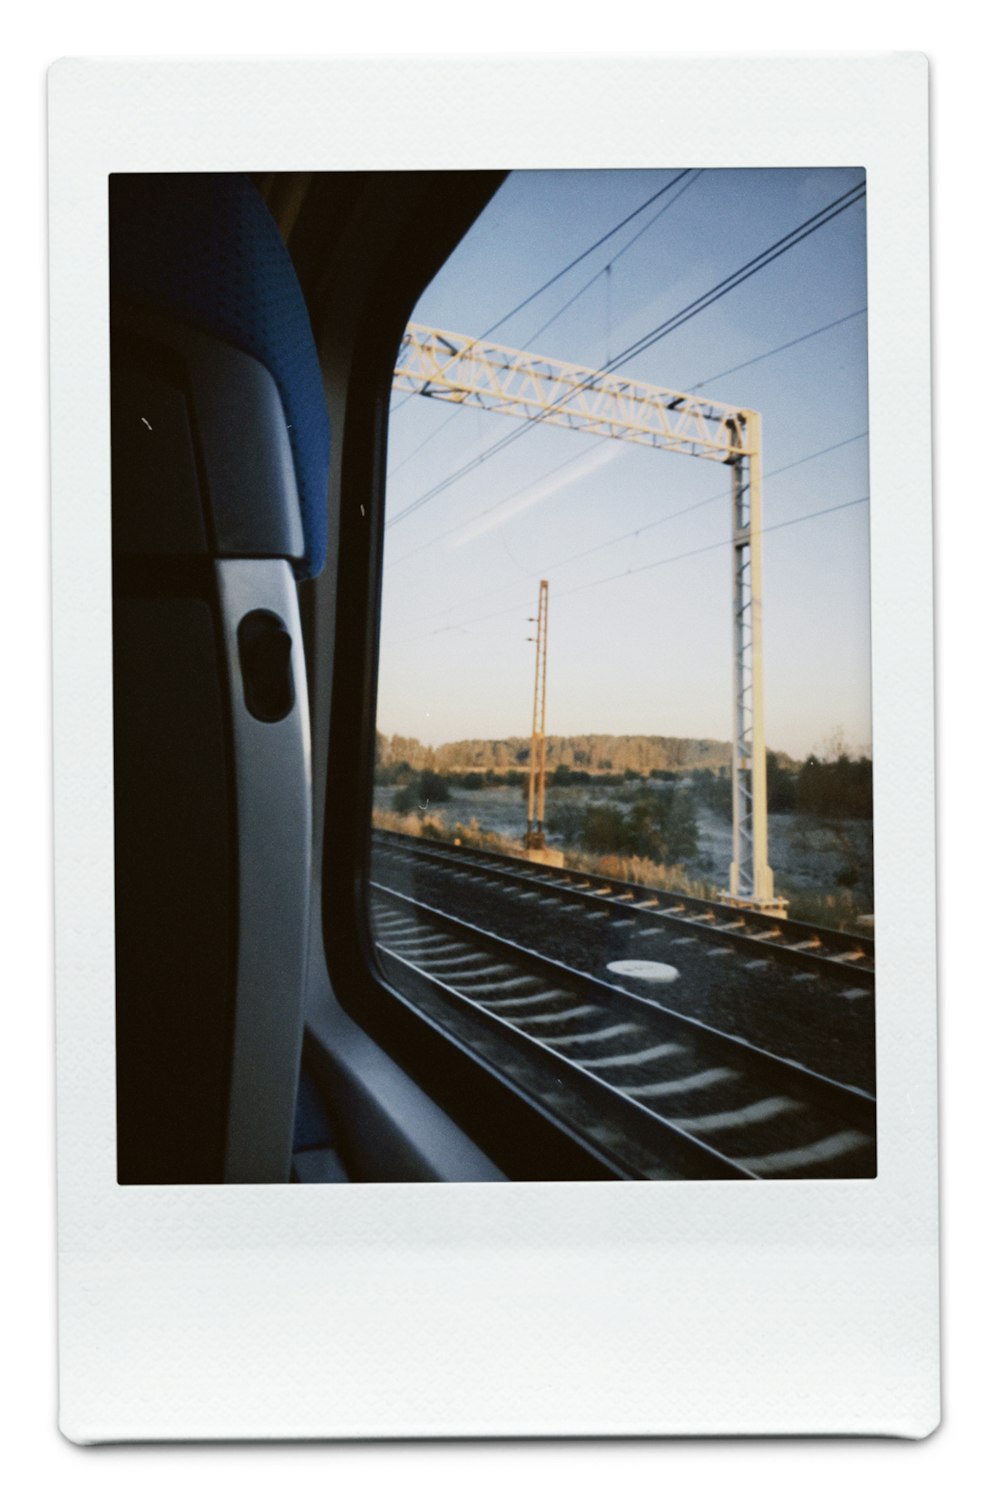 a picture taken from inside a car of a train